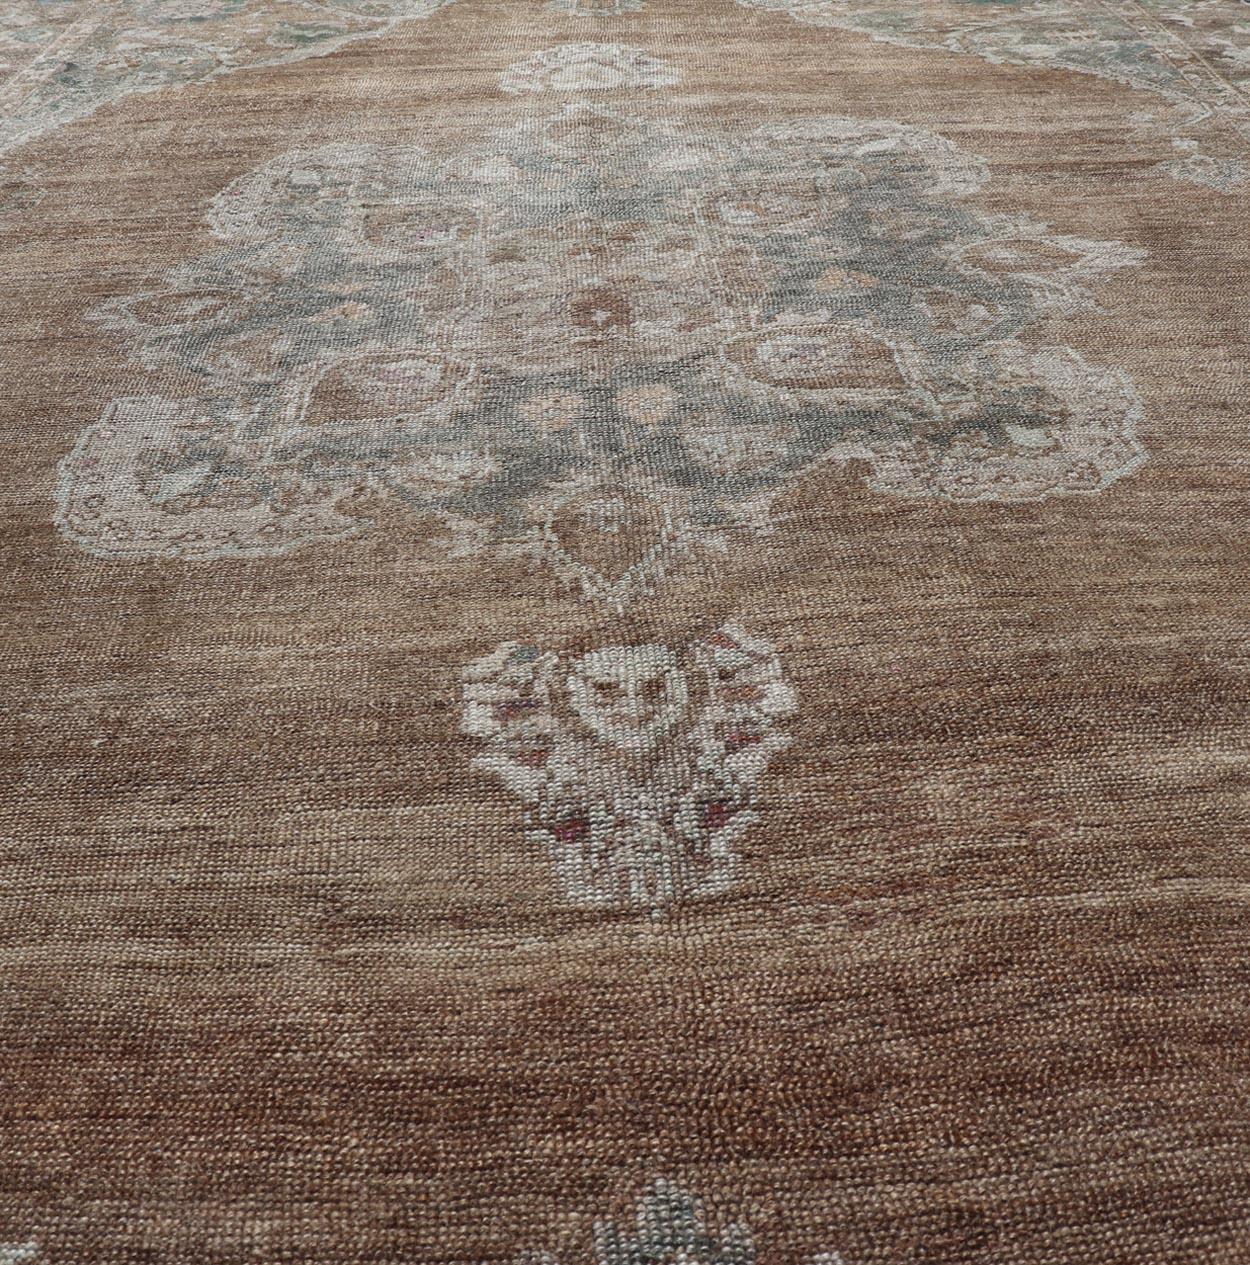 Vintage Turkish Kars Rug with Floral Medallion in Camel, Tan, Taupe and Grey In Good Condition For Sale In Atlanta, GA